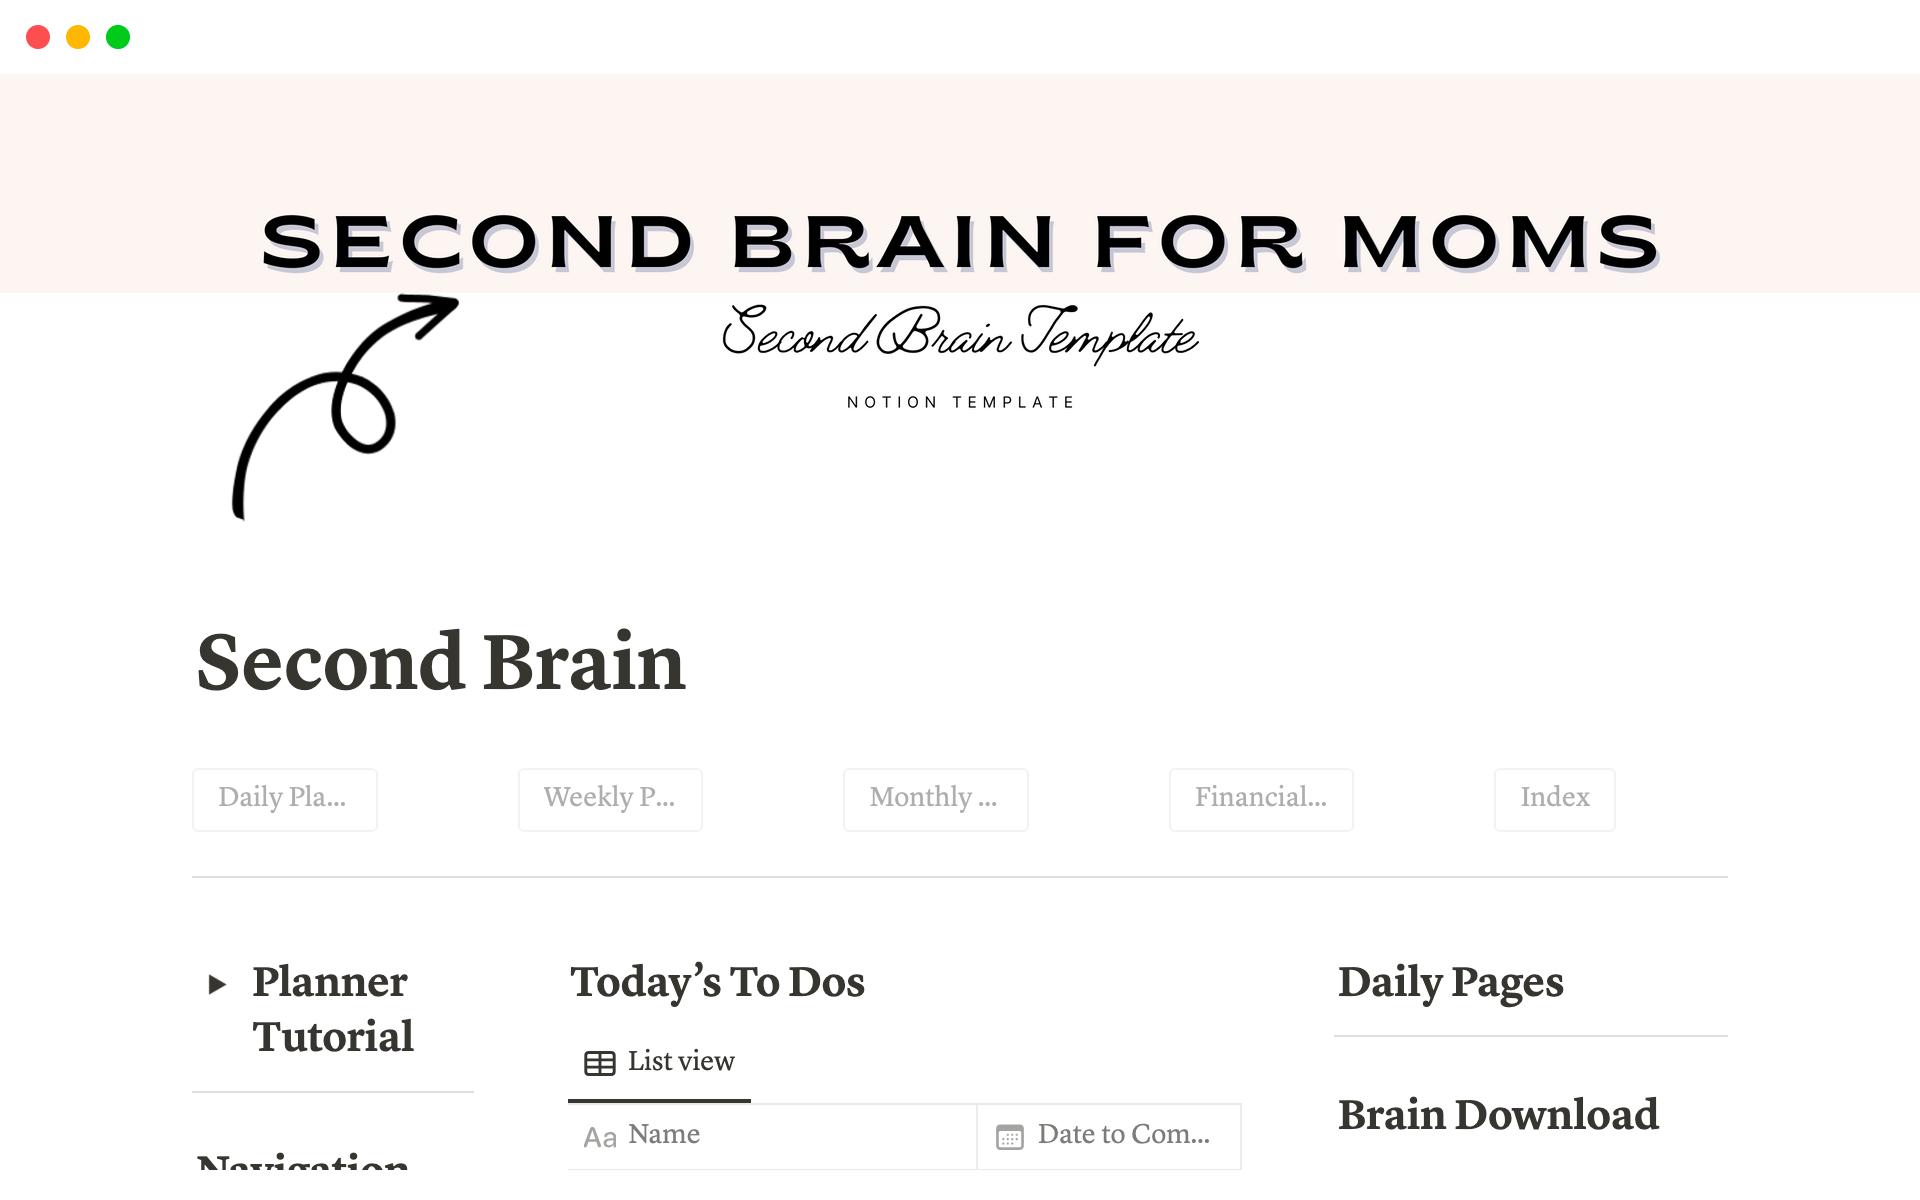 Ultimate Planner for Mom: All in One Life Planner & Second Brainのテンプレートのプレビュー